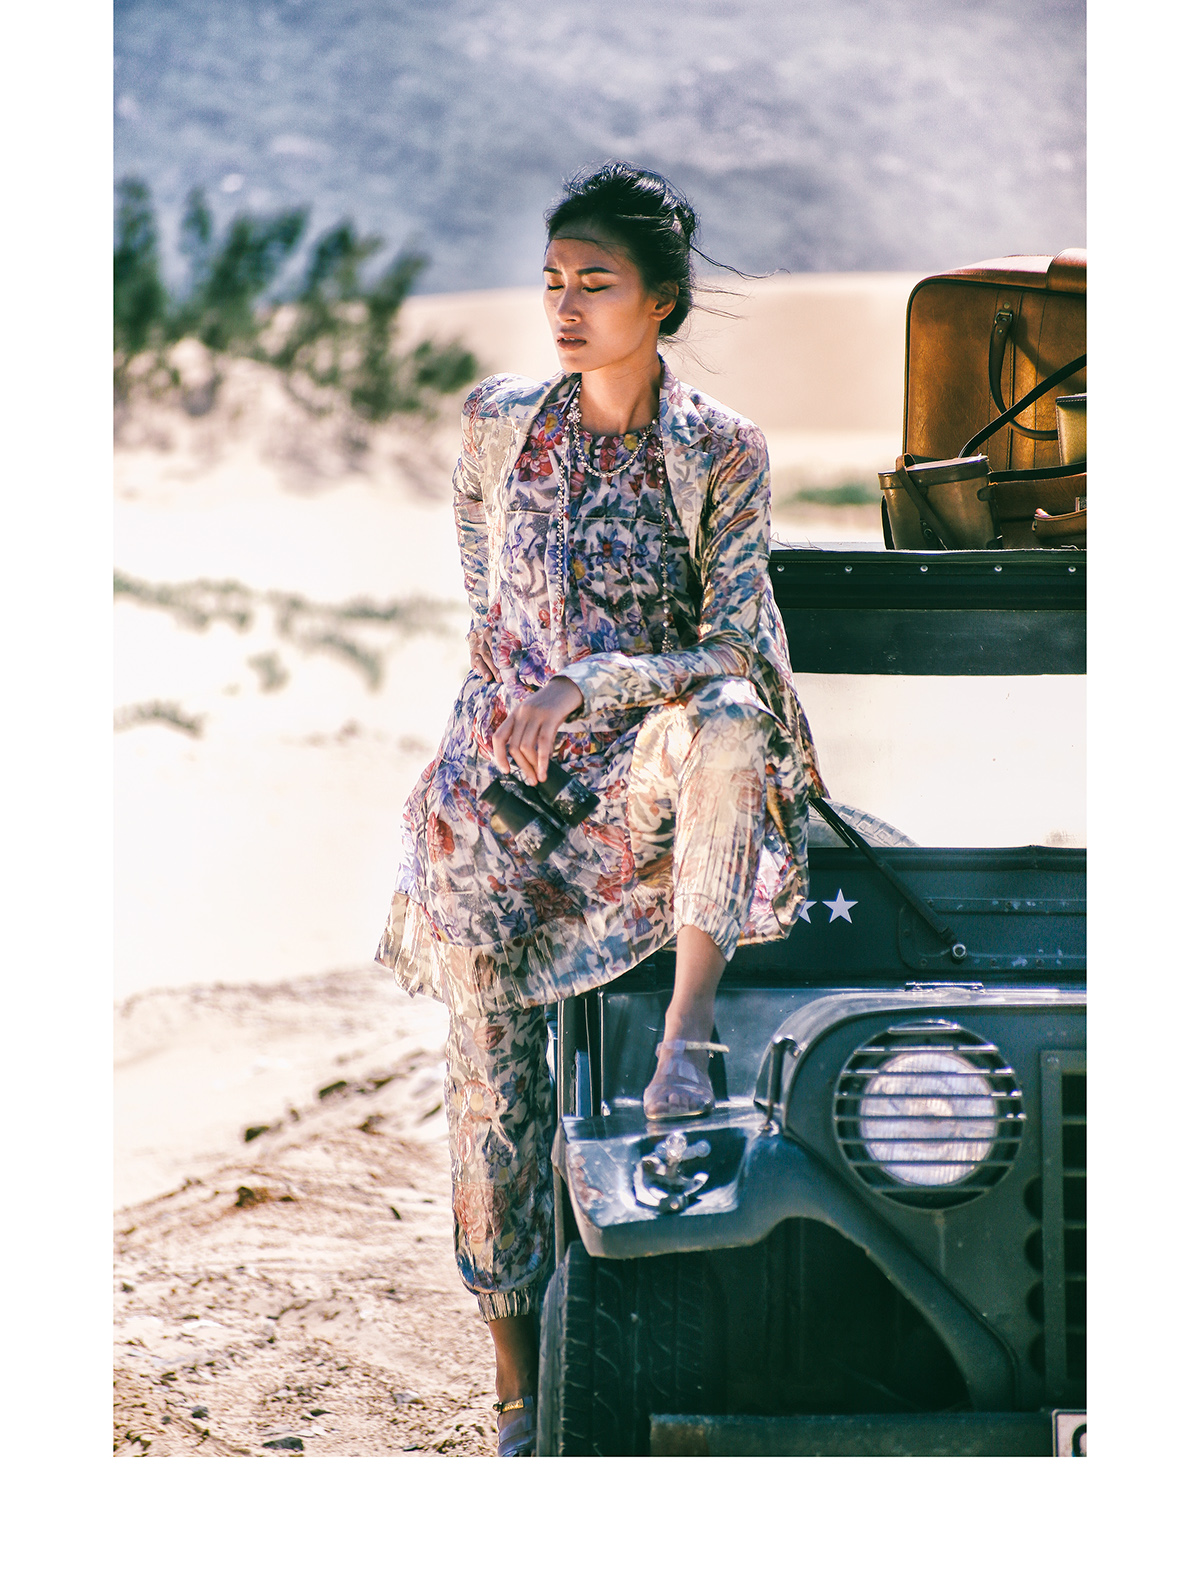 muse desert chanel model SILK Make Up stylish life blue sheep editorial beauty texture material beloved